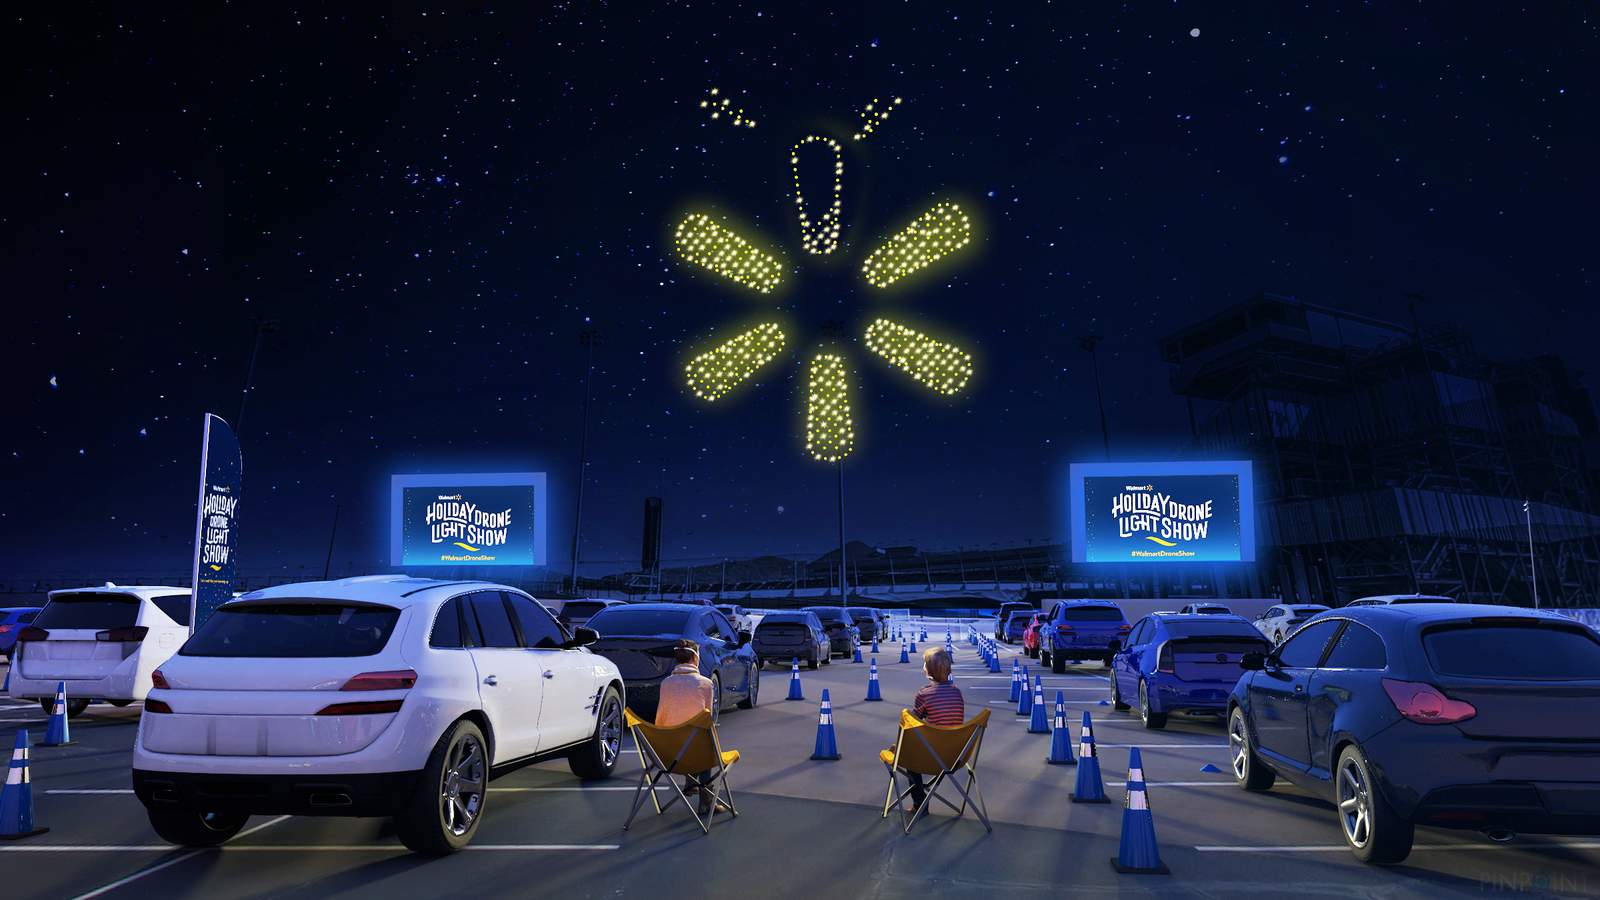 Walmart to host special holiday drone show in San Antonio. Here’s how to get your free tickets